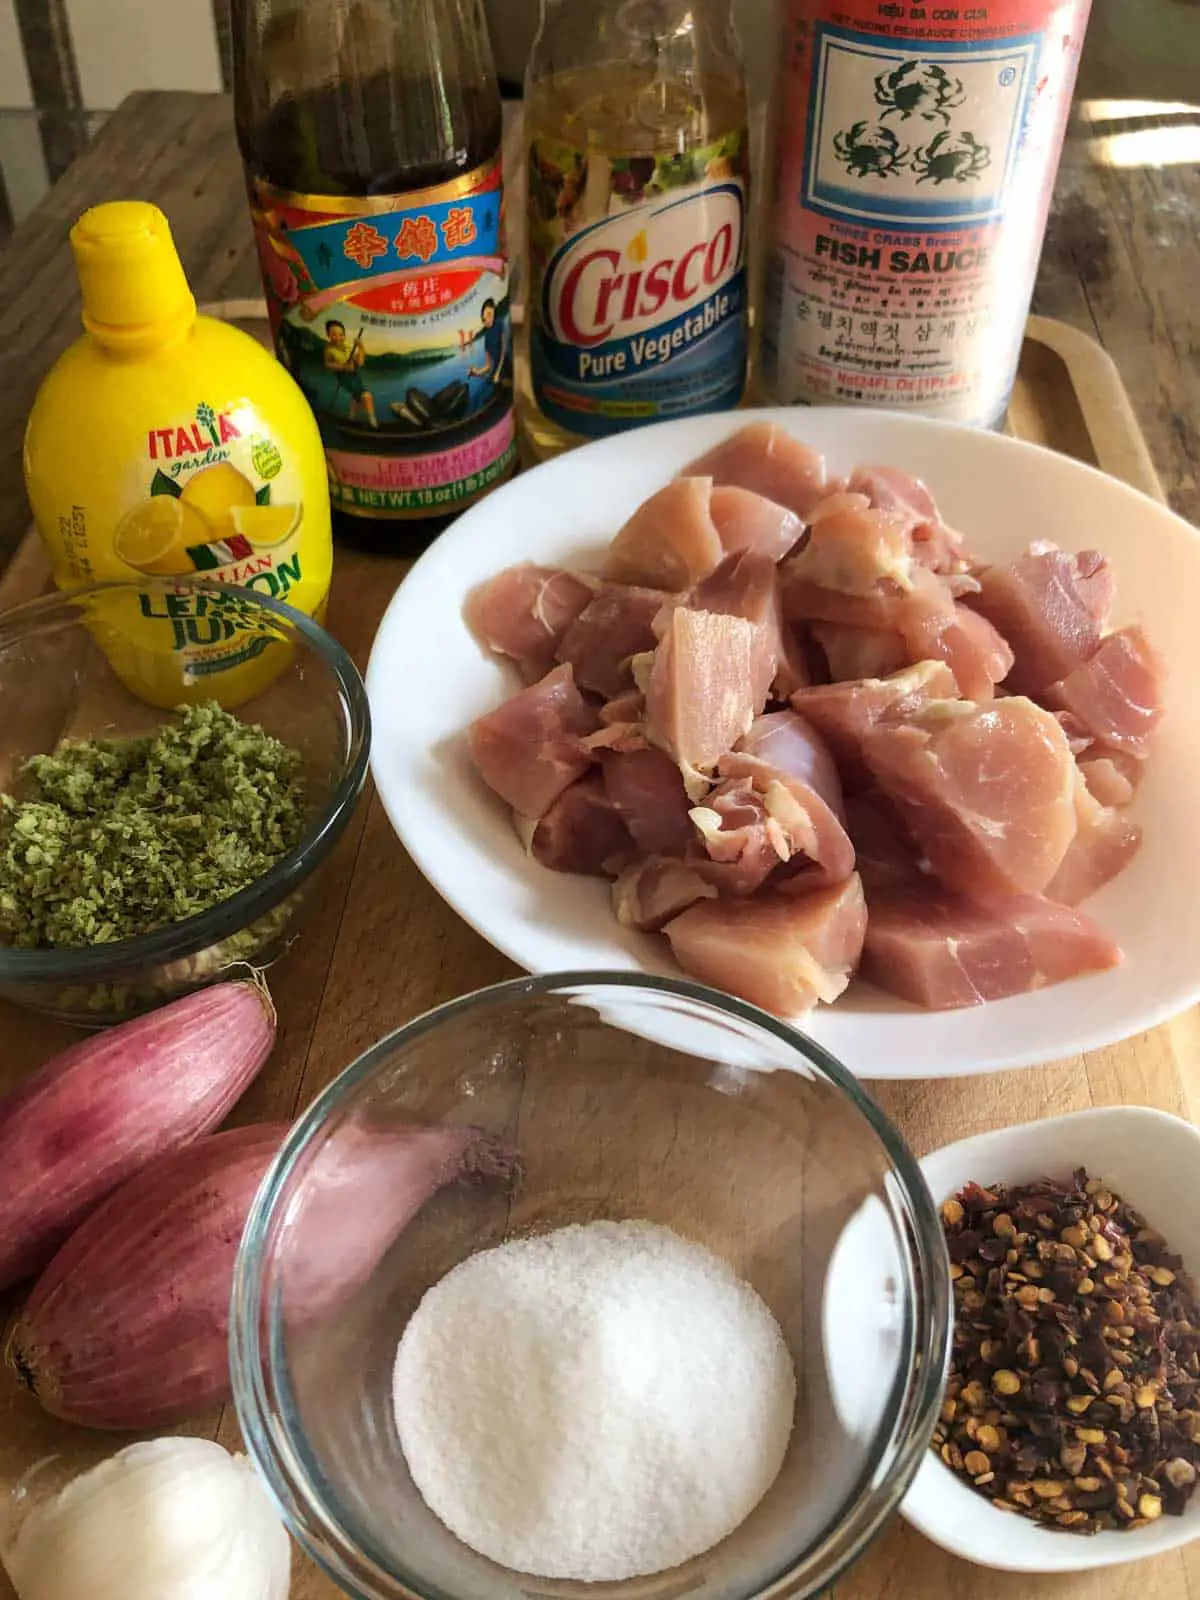 Pieces of chicken thighs cut up in a white dish, red chili flakes in a white dish, sugar in a glass bowl, garlic, 2 shallots, a glass dish with frozen lemongrass, a bottle of lemon juice, bottle of oyster sauce, vegetable oil, and a bottle of fish sauce.